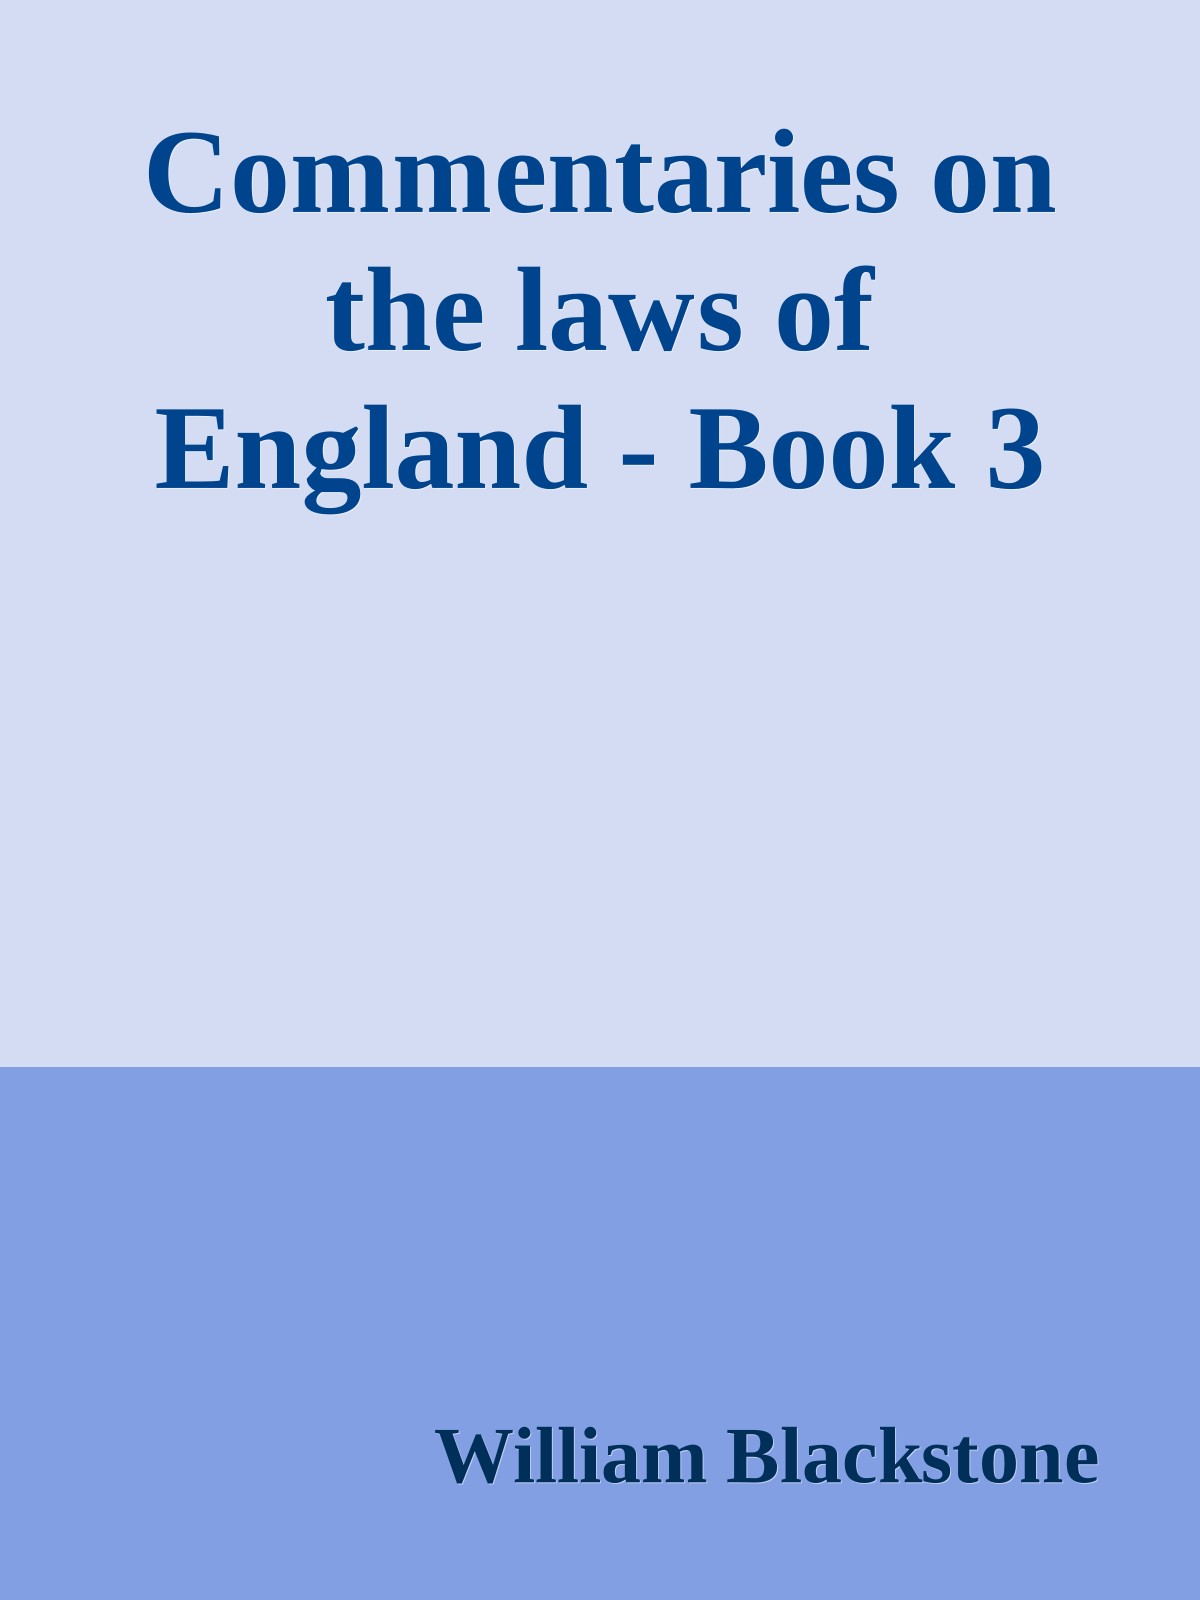 Commentaries on the laws of England - Book 3